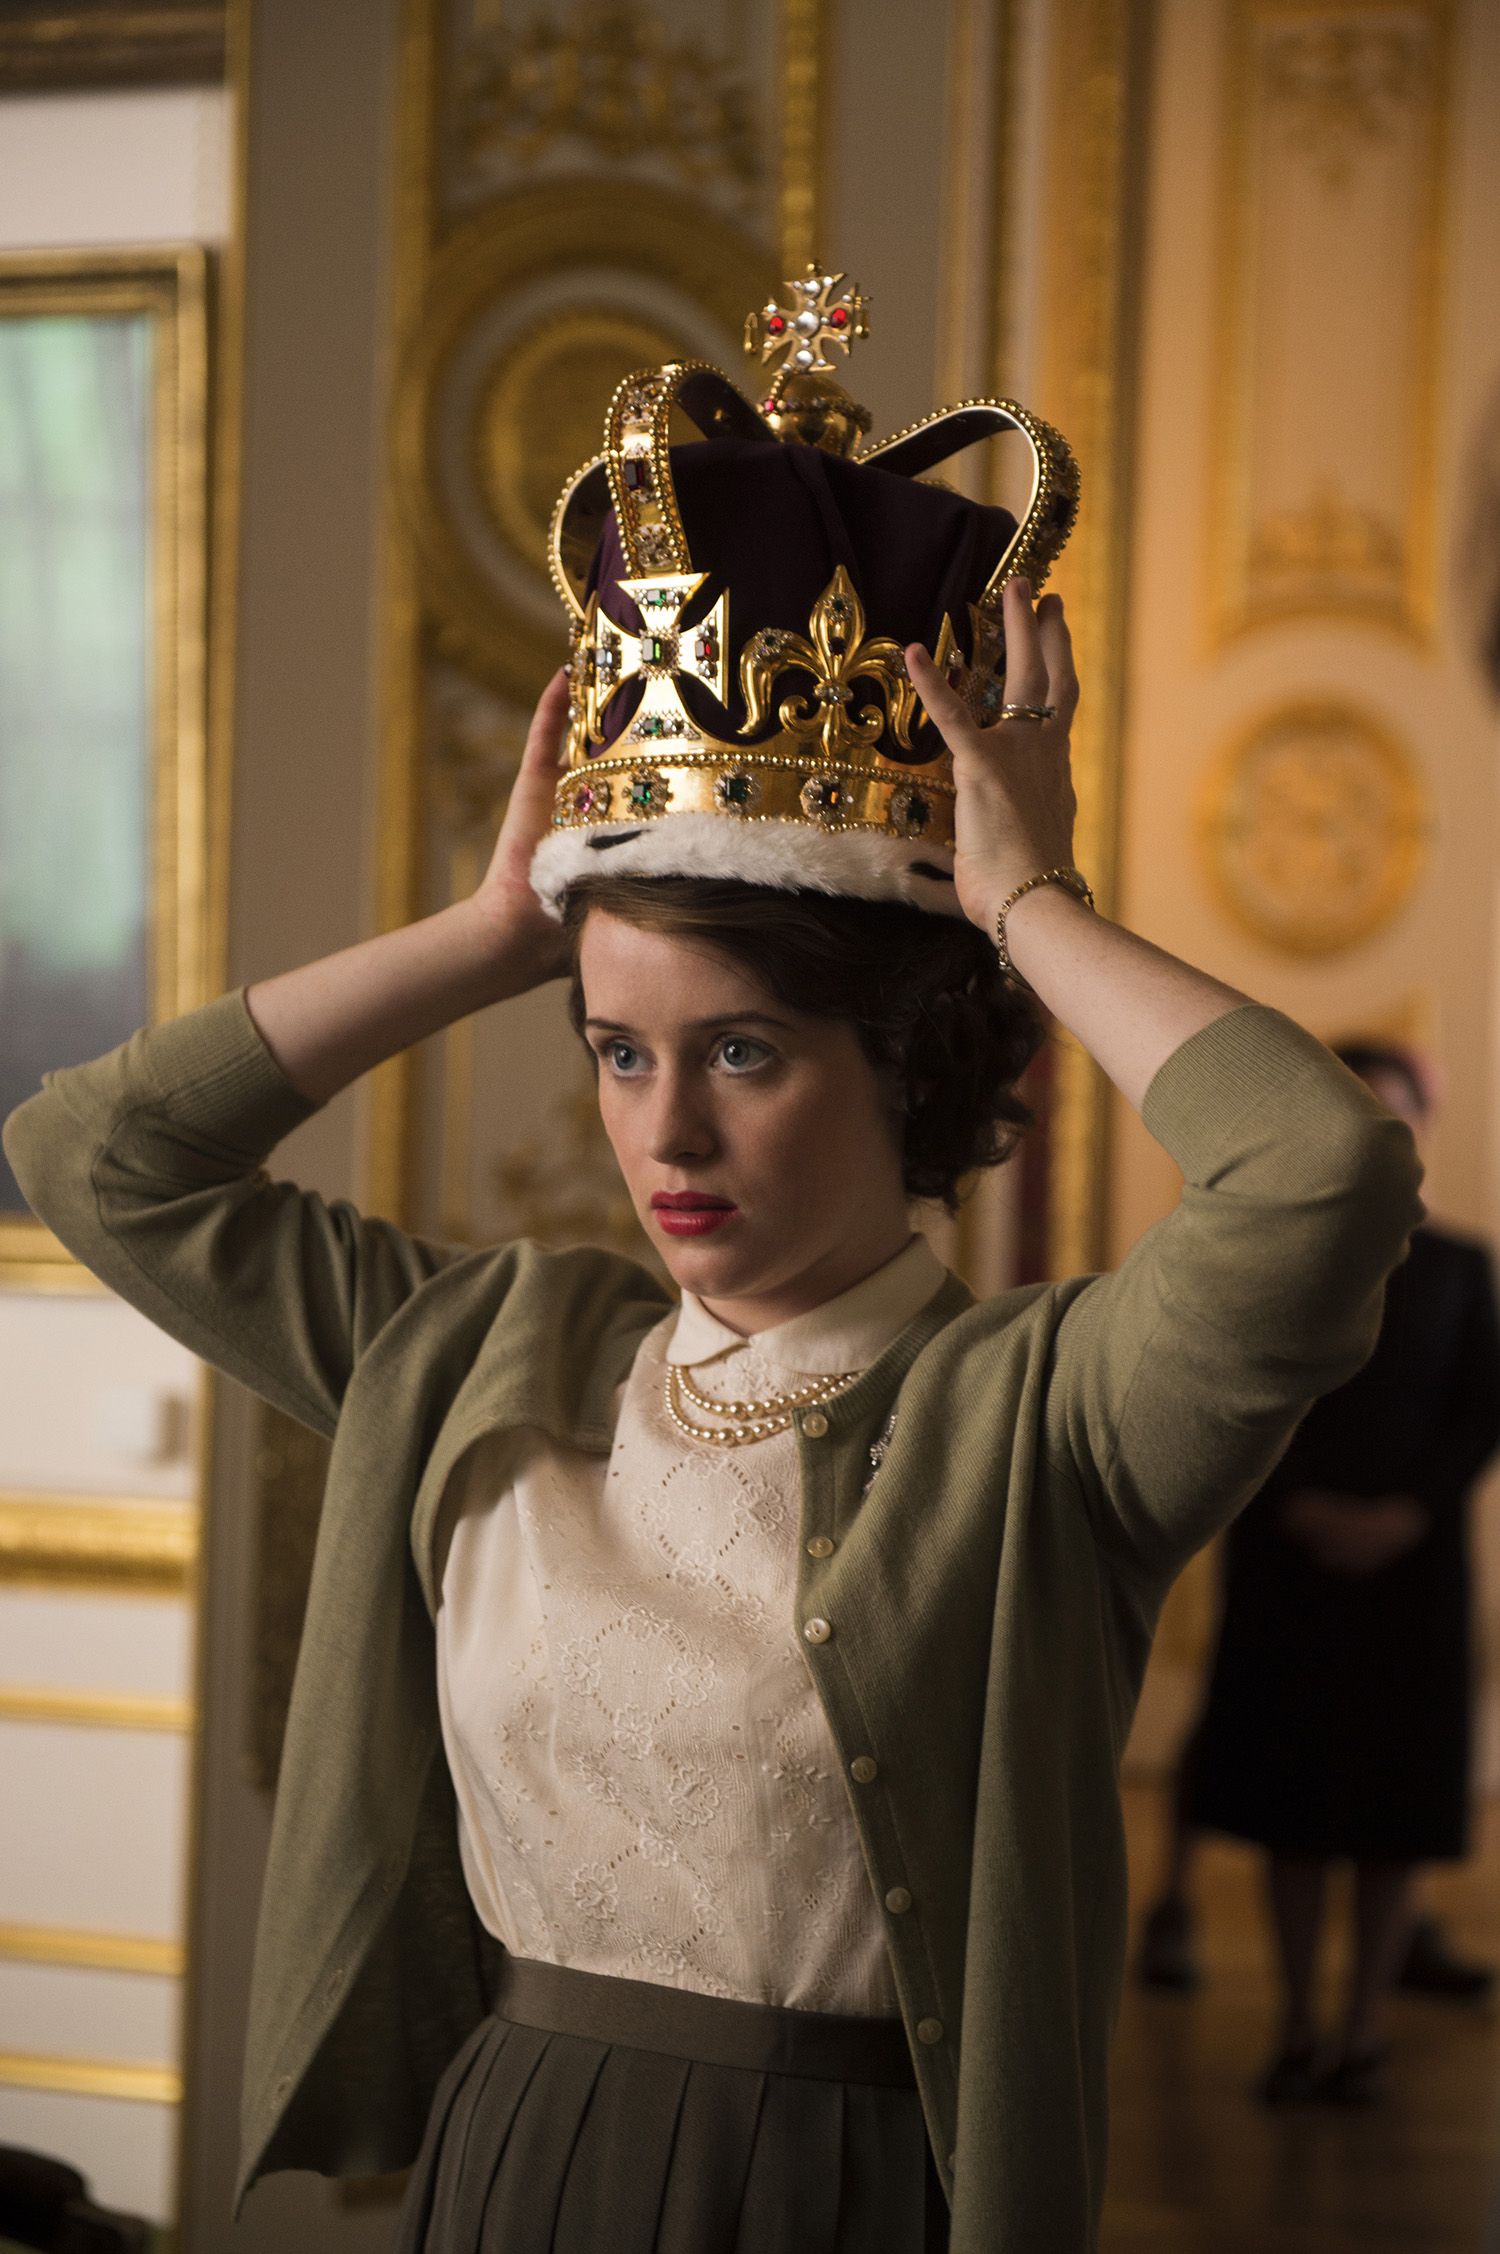 the crown: 'The Crown' producers apologise to Claire Foy and Matt Smith  over gender pay gap controversy - The Economic Times